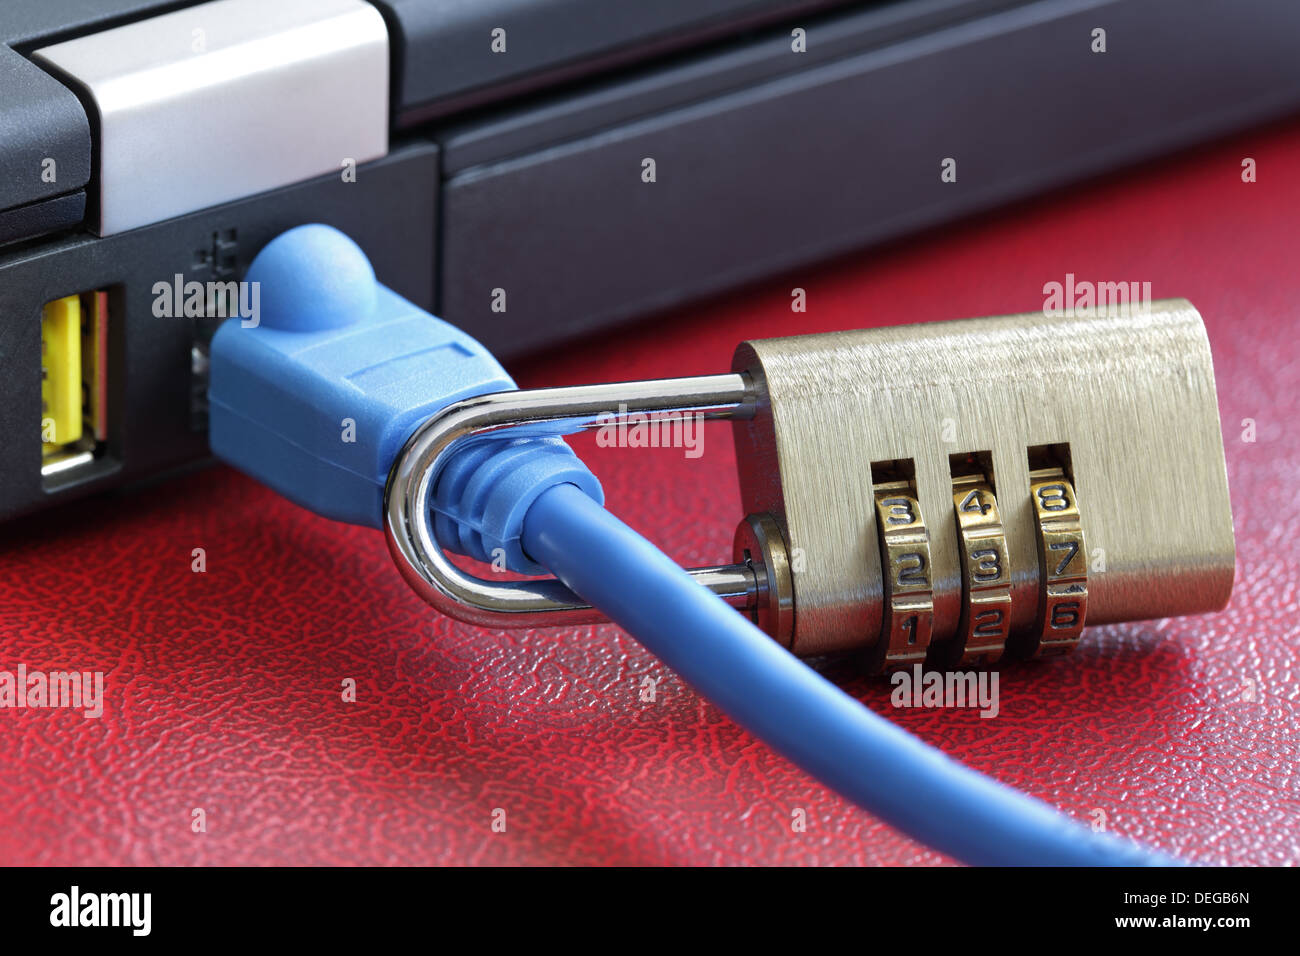 Network security Stock Photo